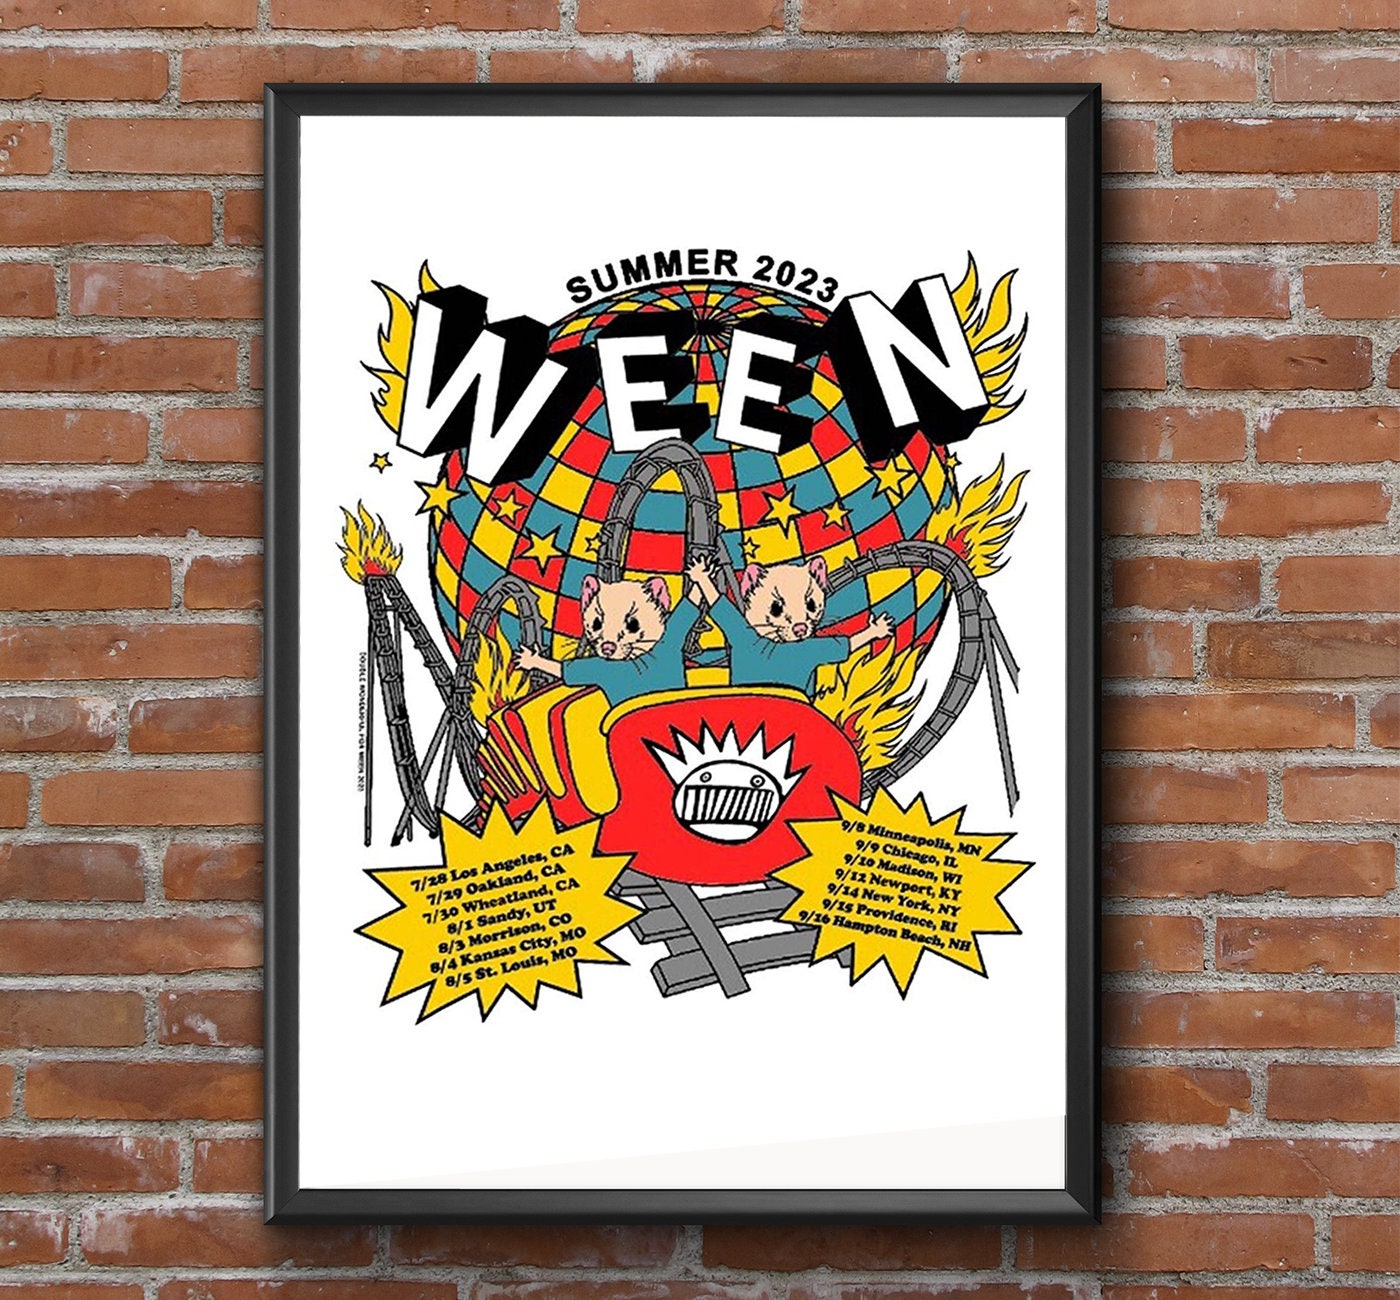 Discover Ween Summer Tour 2023 Poster, Ween Rock Band Tour Poster